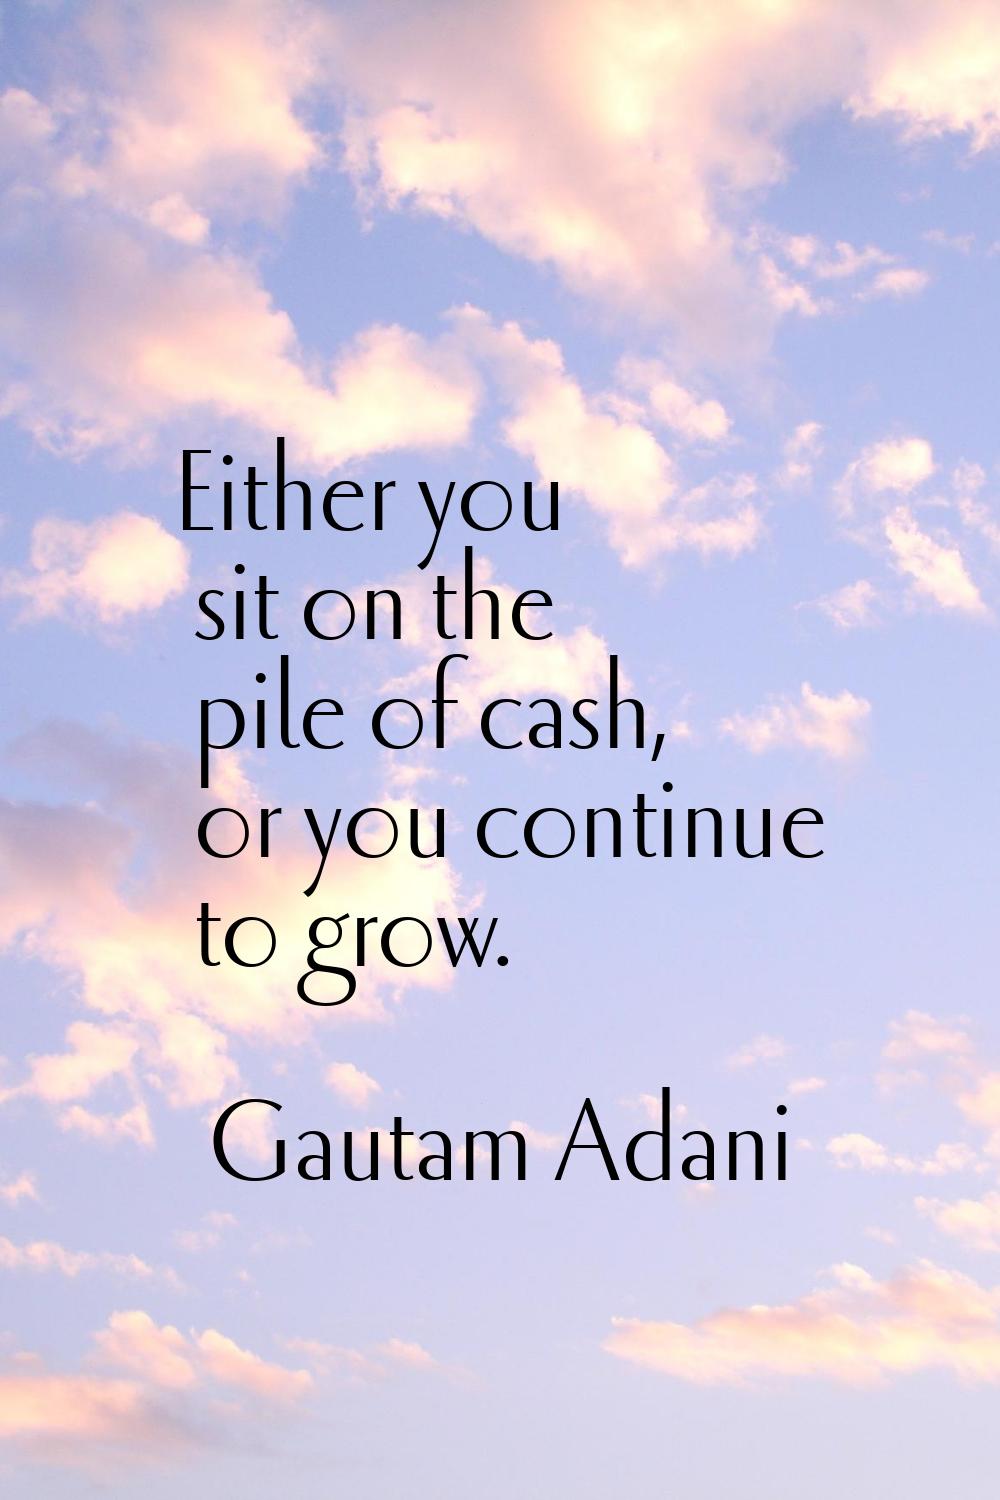 Either you sit on the pile of cash, or you continue to grow.